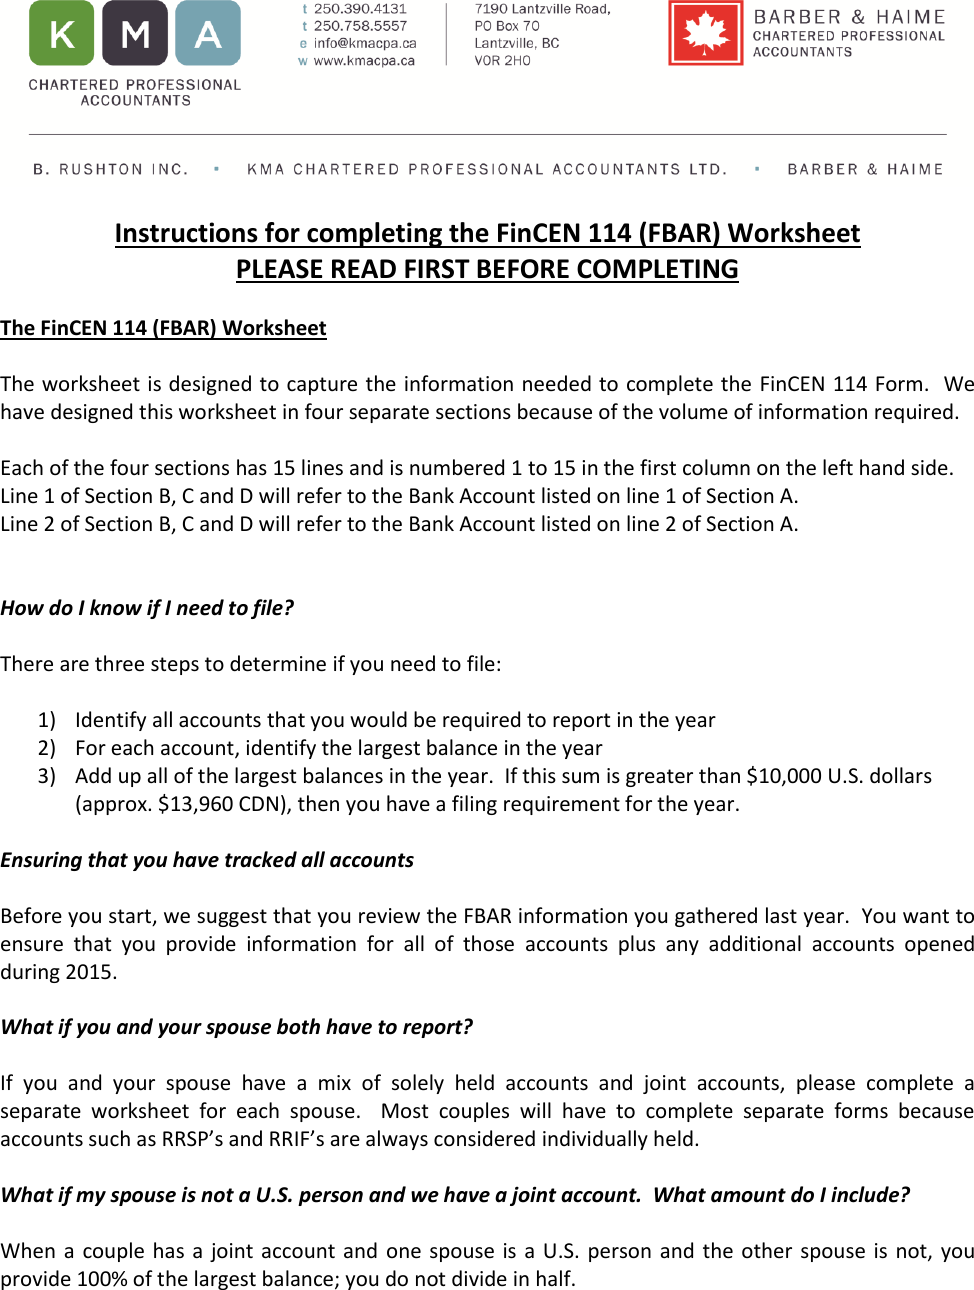 Page 1 of 3 - Instructions-for-completing-fincen-114-worksheet